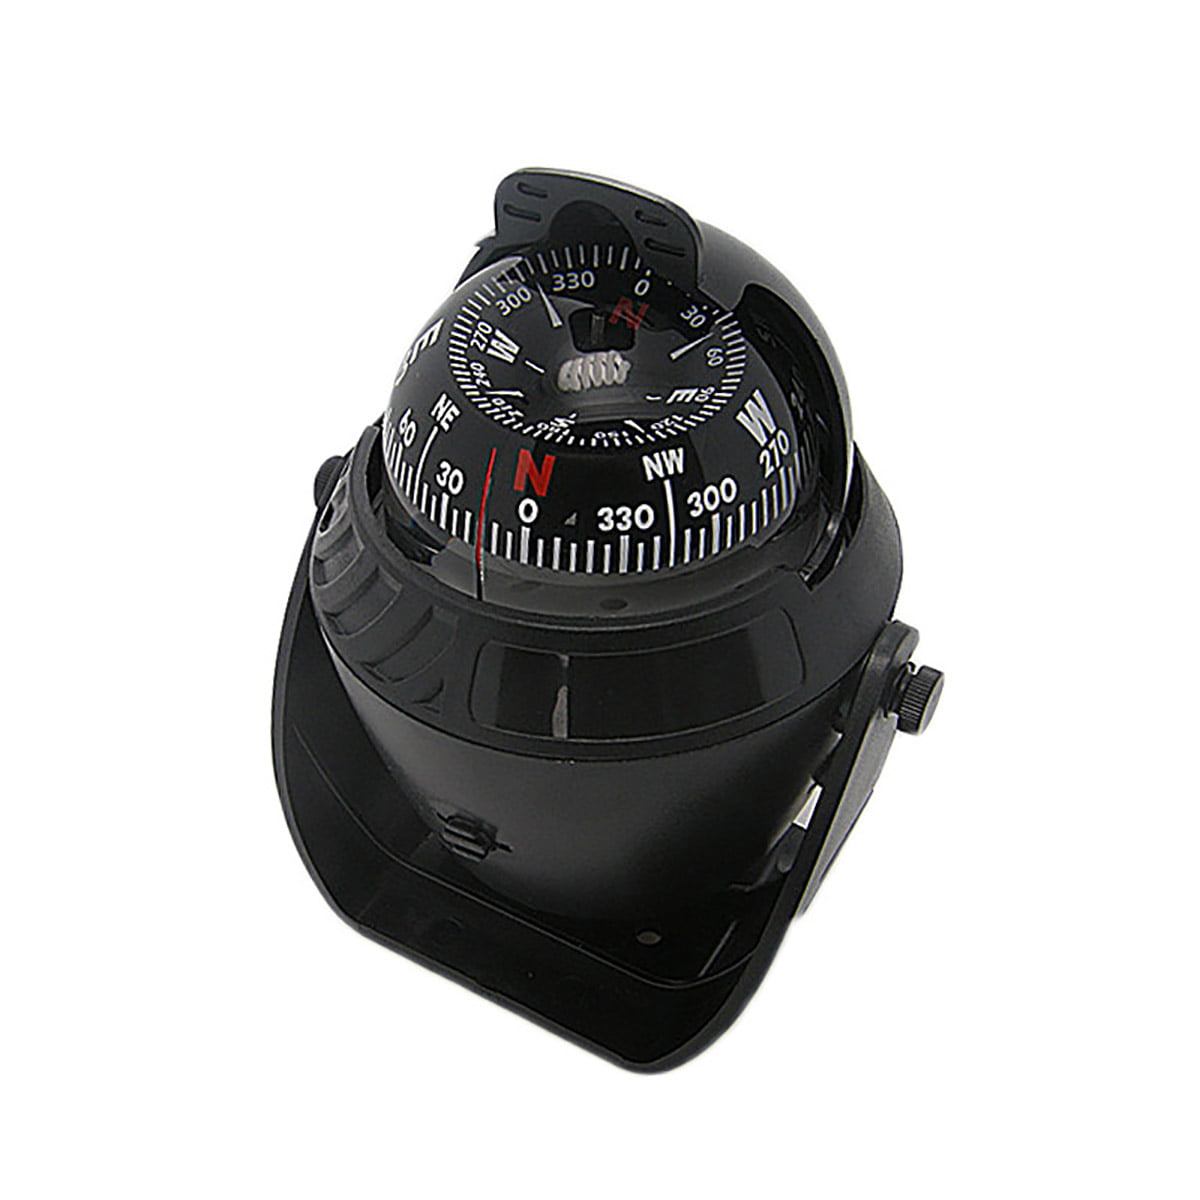 Electronic Vehicle Car Compass w/ Mount for Ball Navigation Marine Boat ...